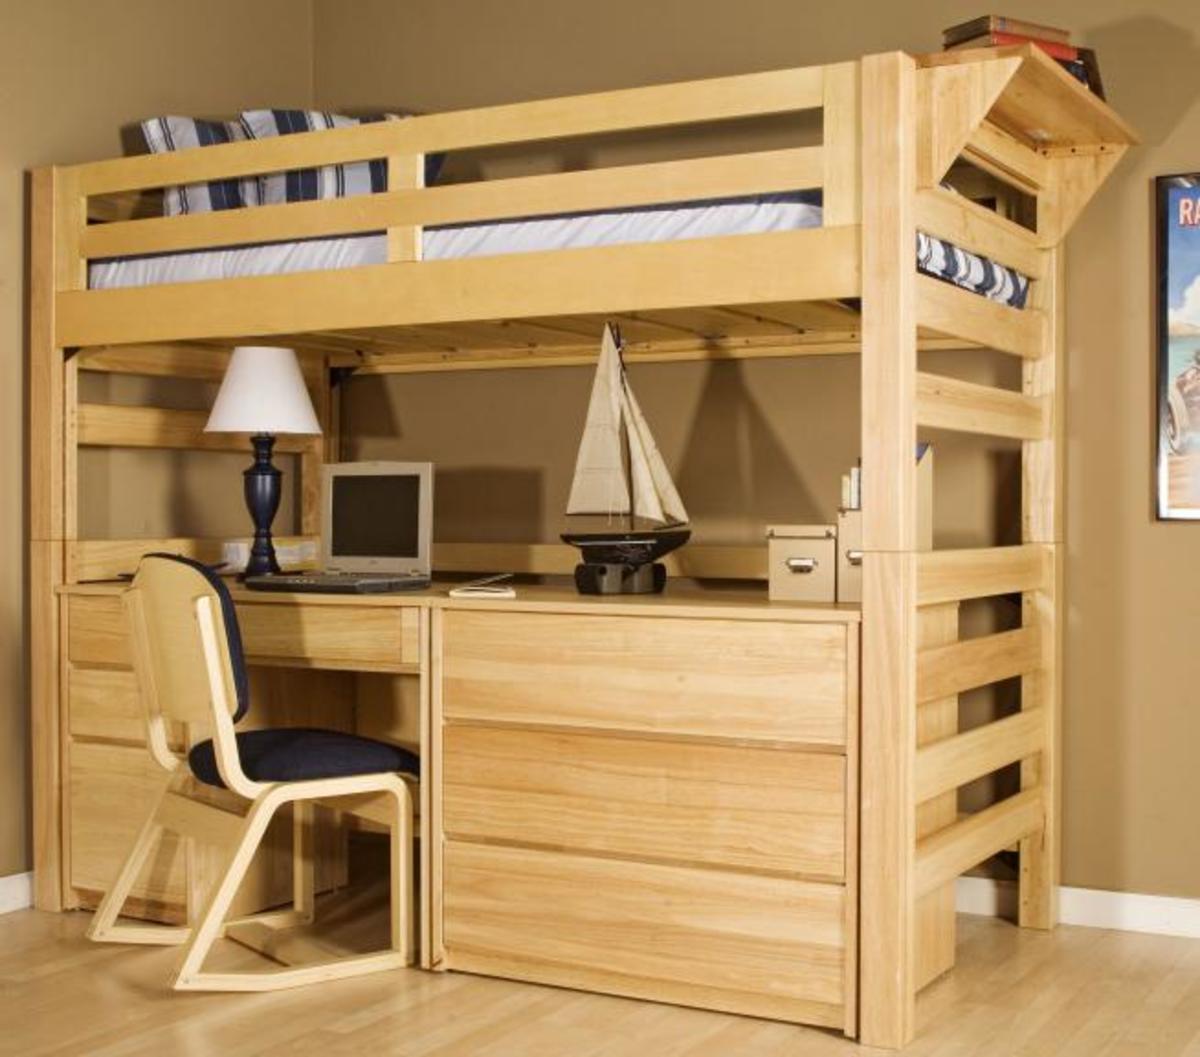 space-saving-devices-for-your-college-dorm